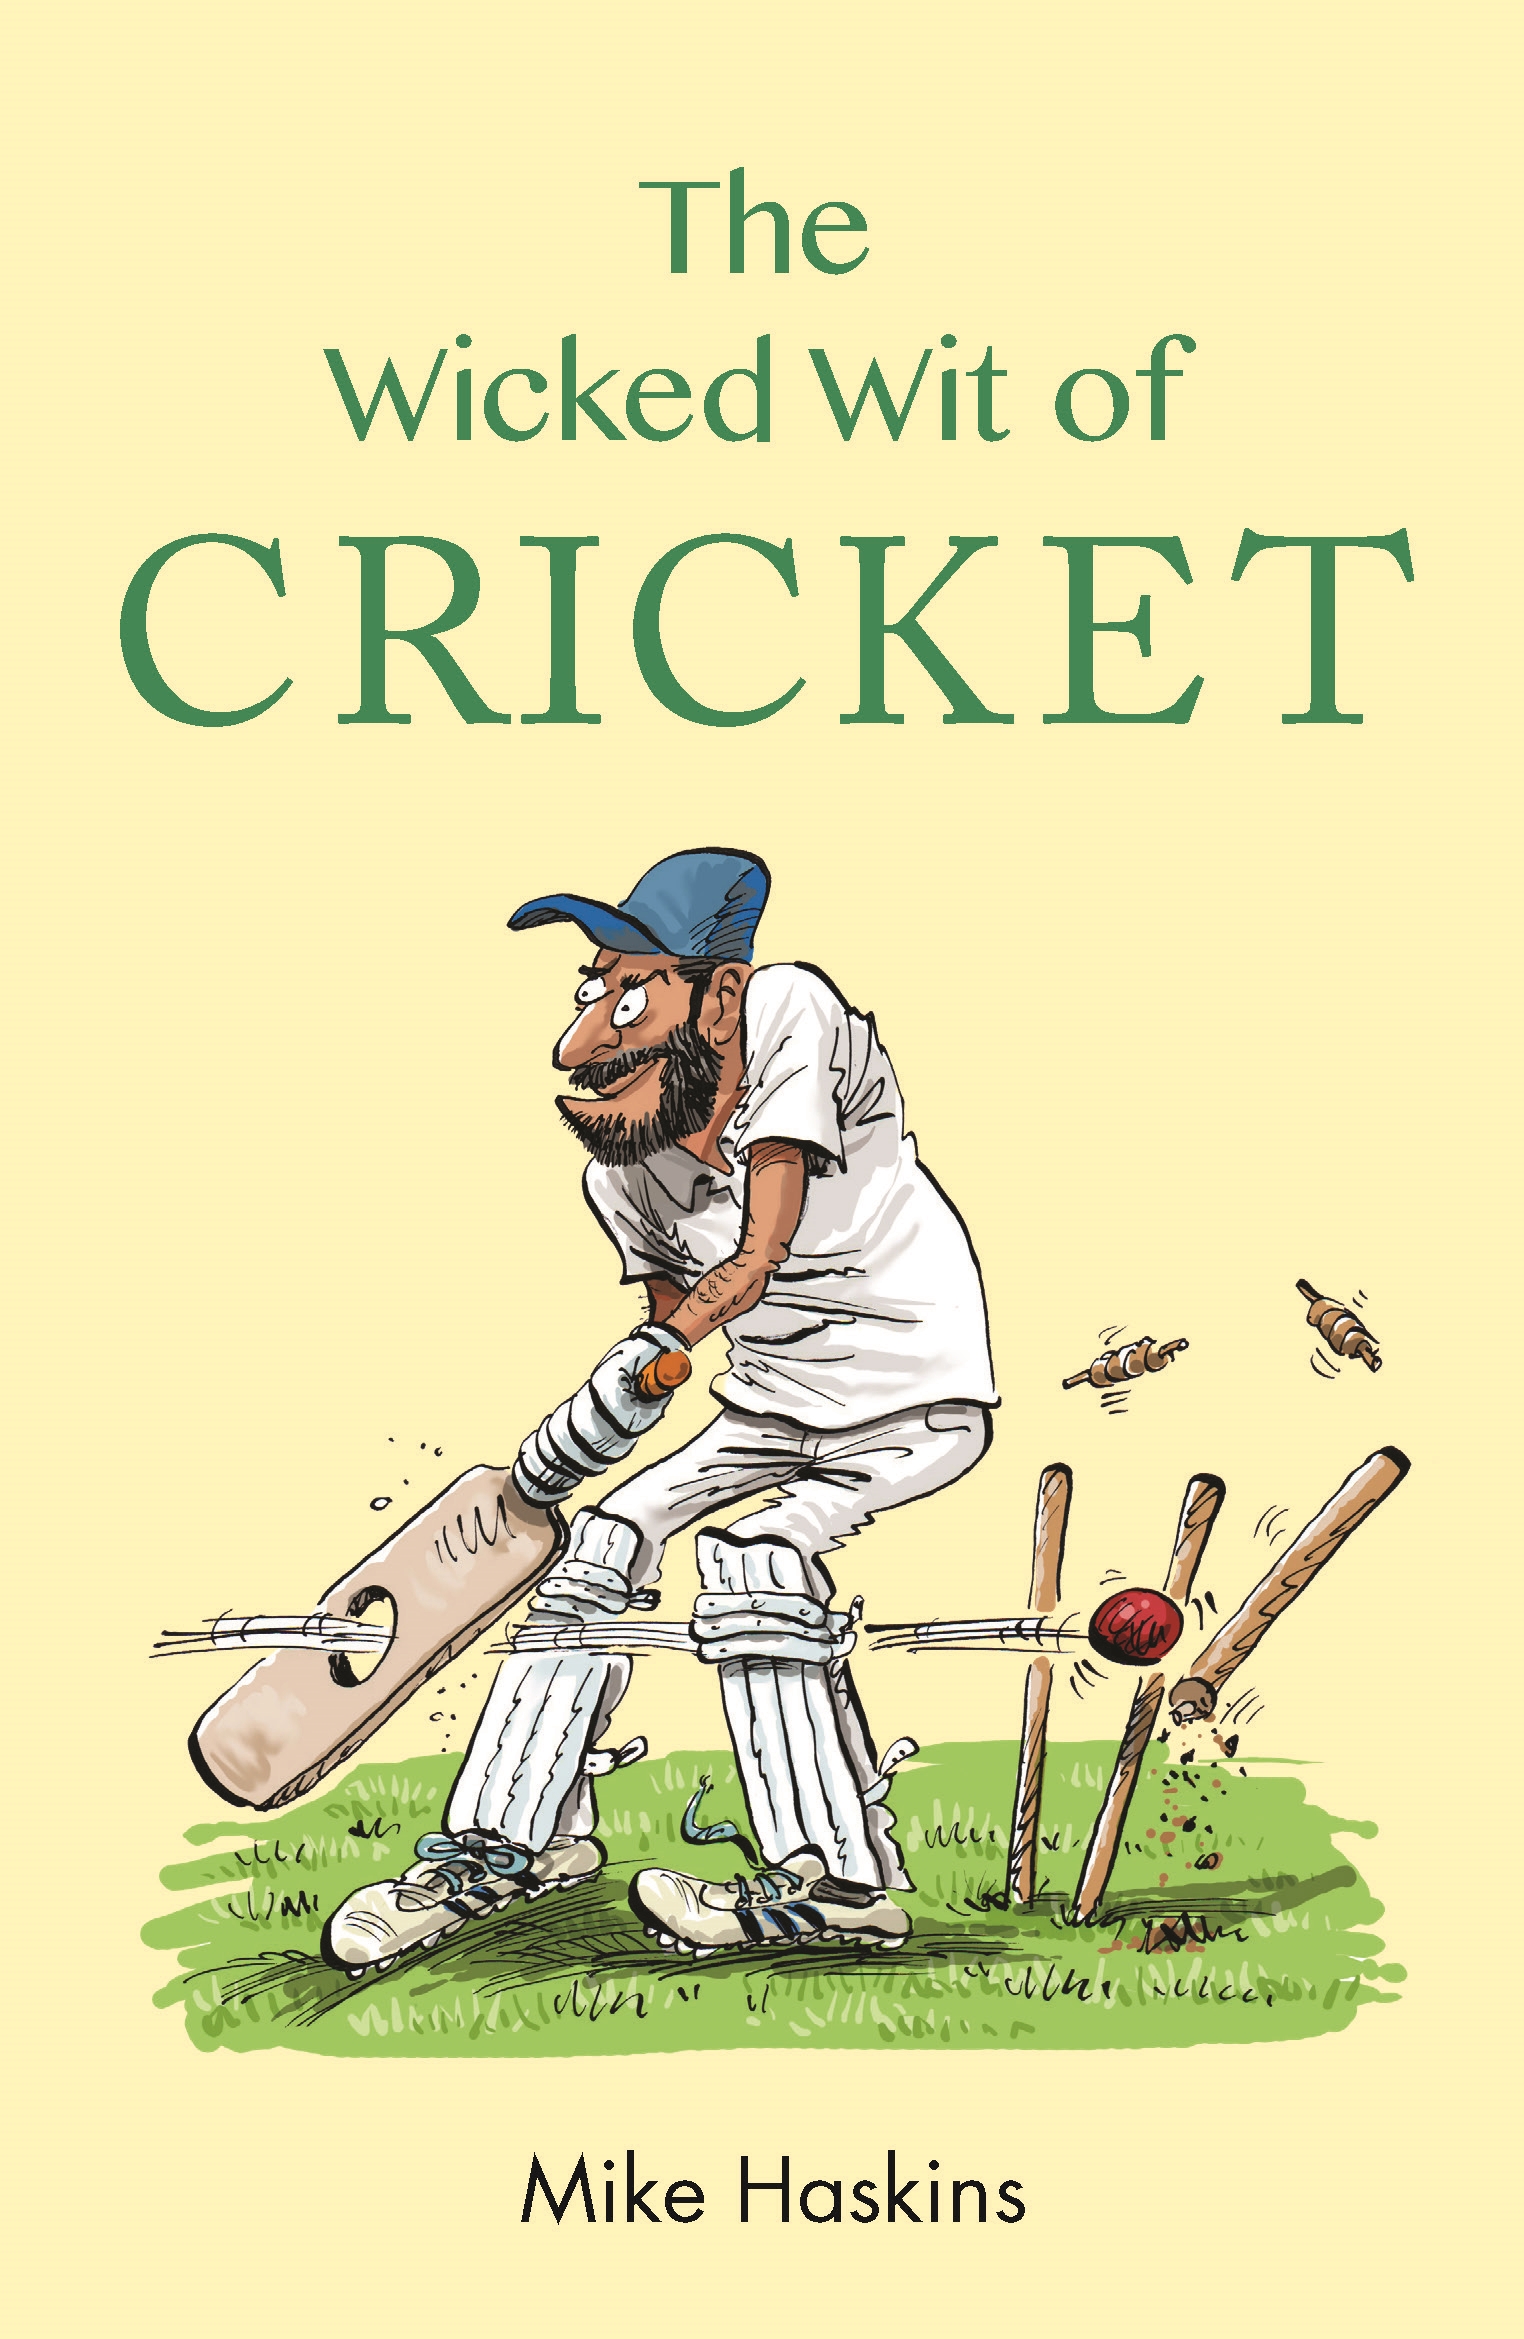 The Wicked Wit of Cricket